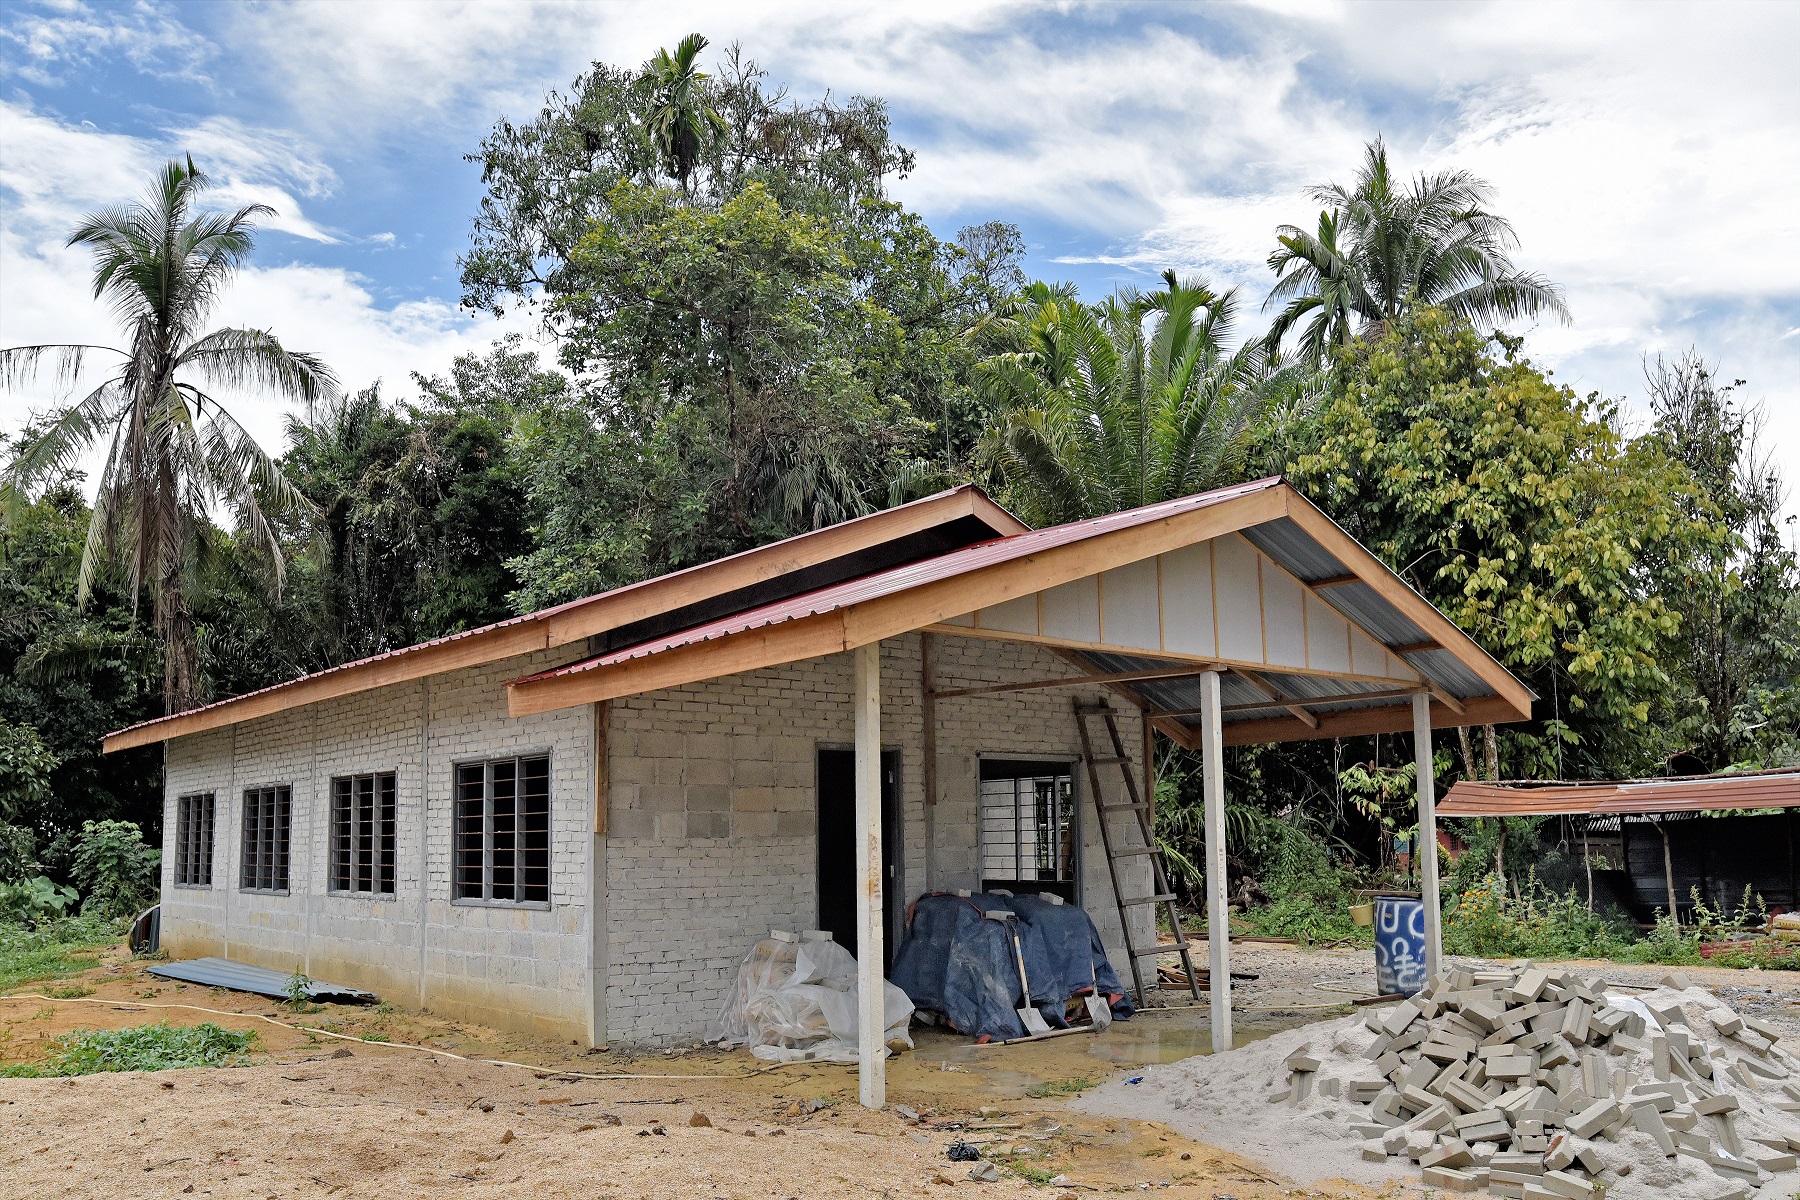 New chapel being built in Kg Balang